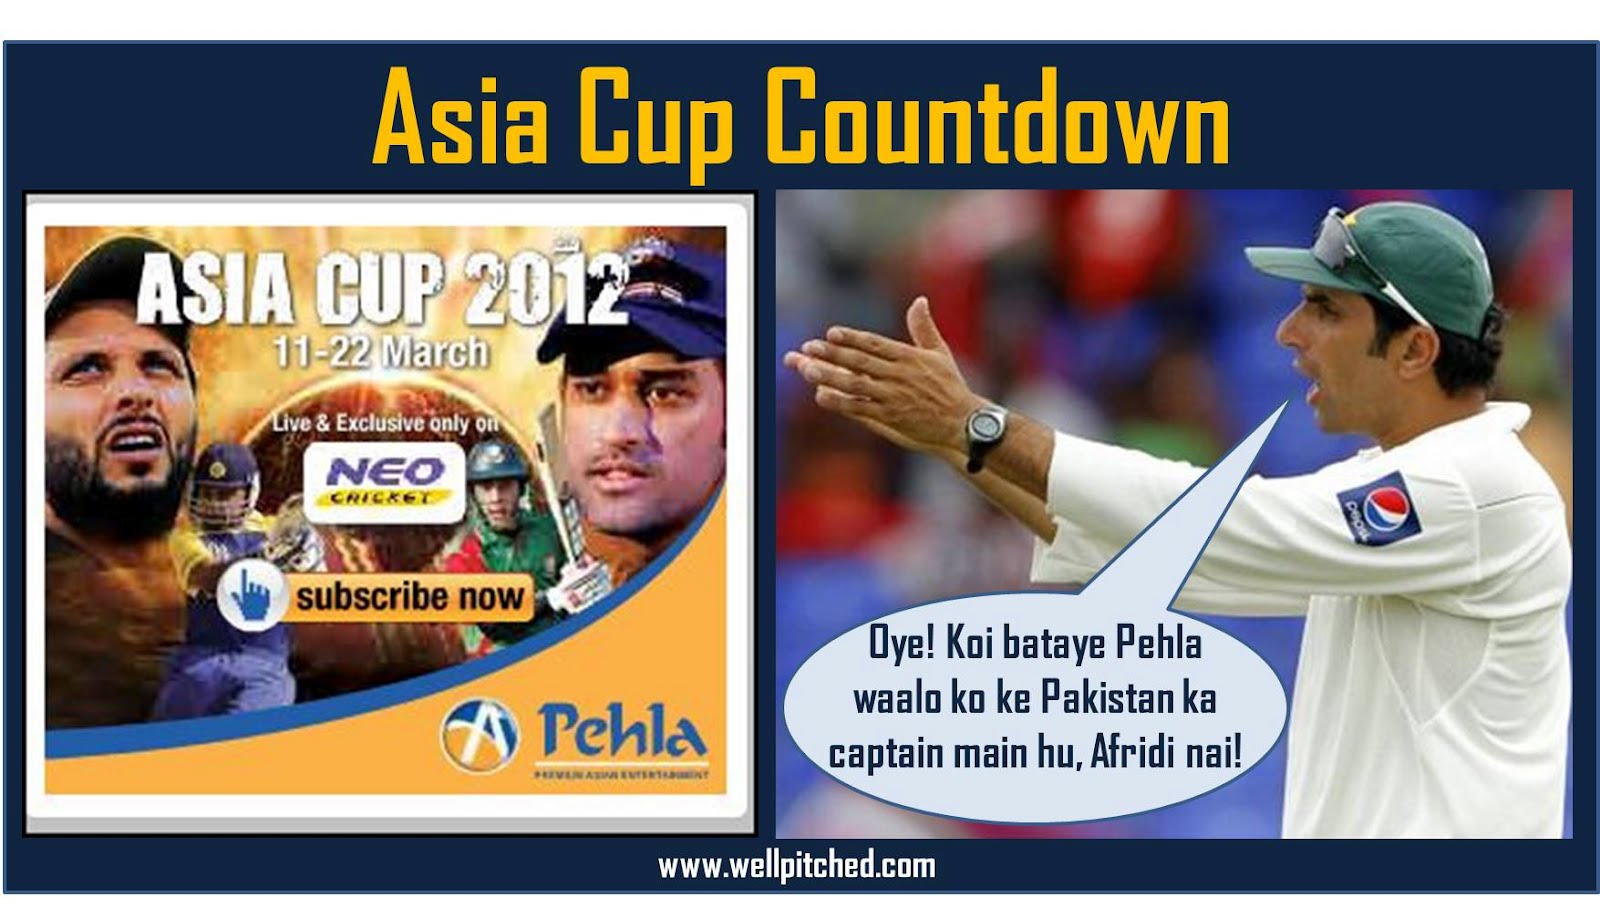 Asia Cup1600 x 908